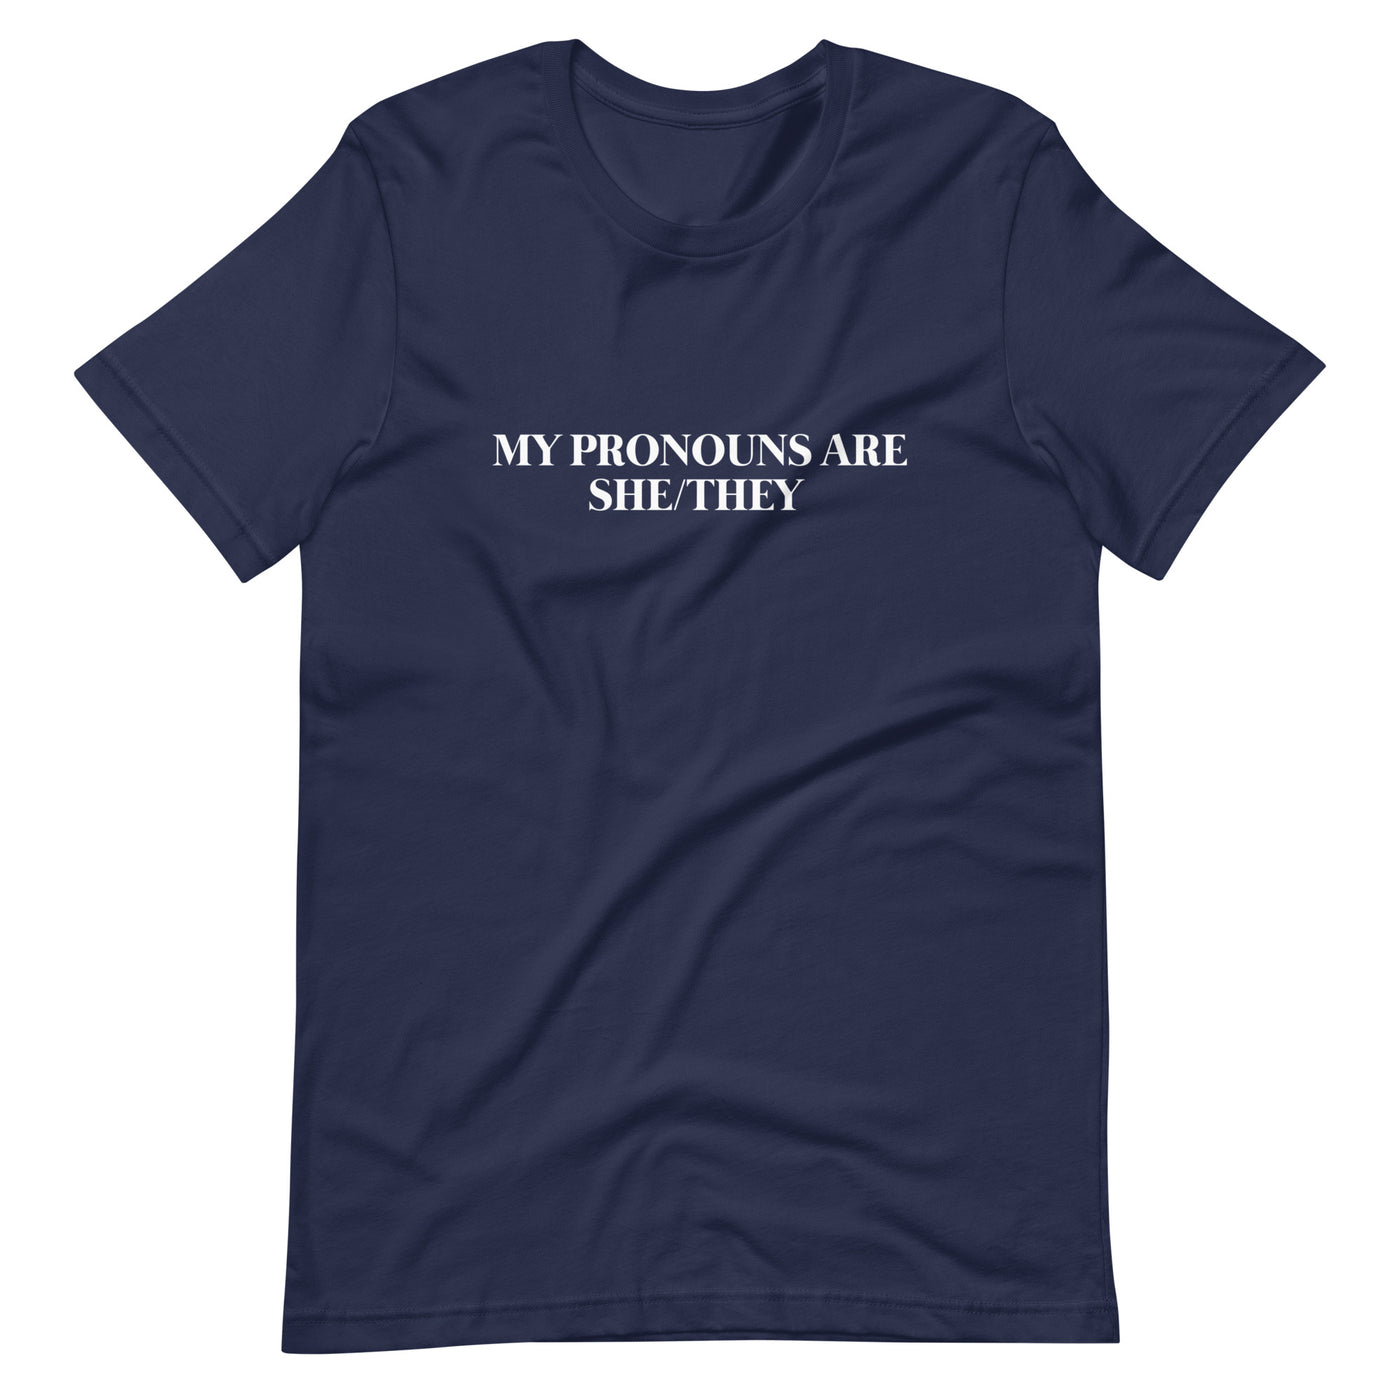 Pride Clothes - No Need to Ask, My Pronouns Are She/They T-Shirt - Navy